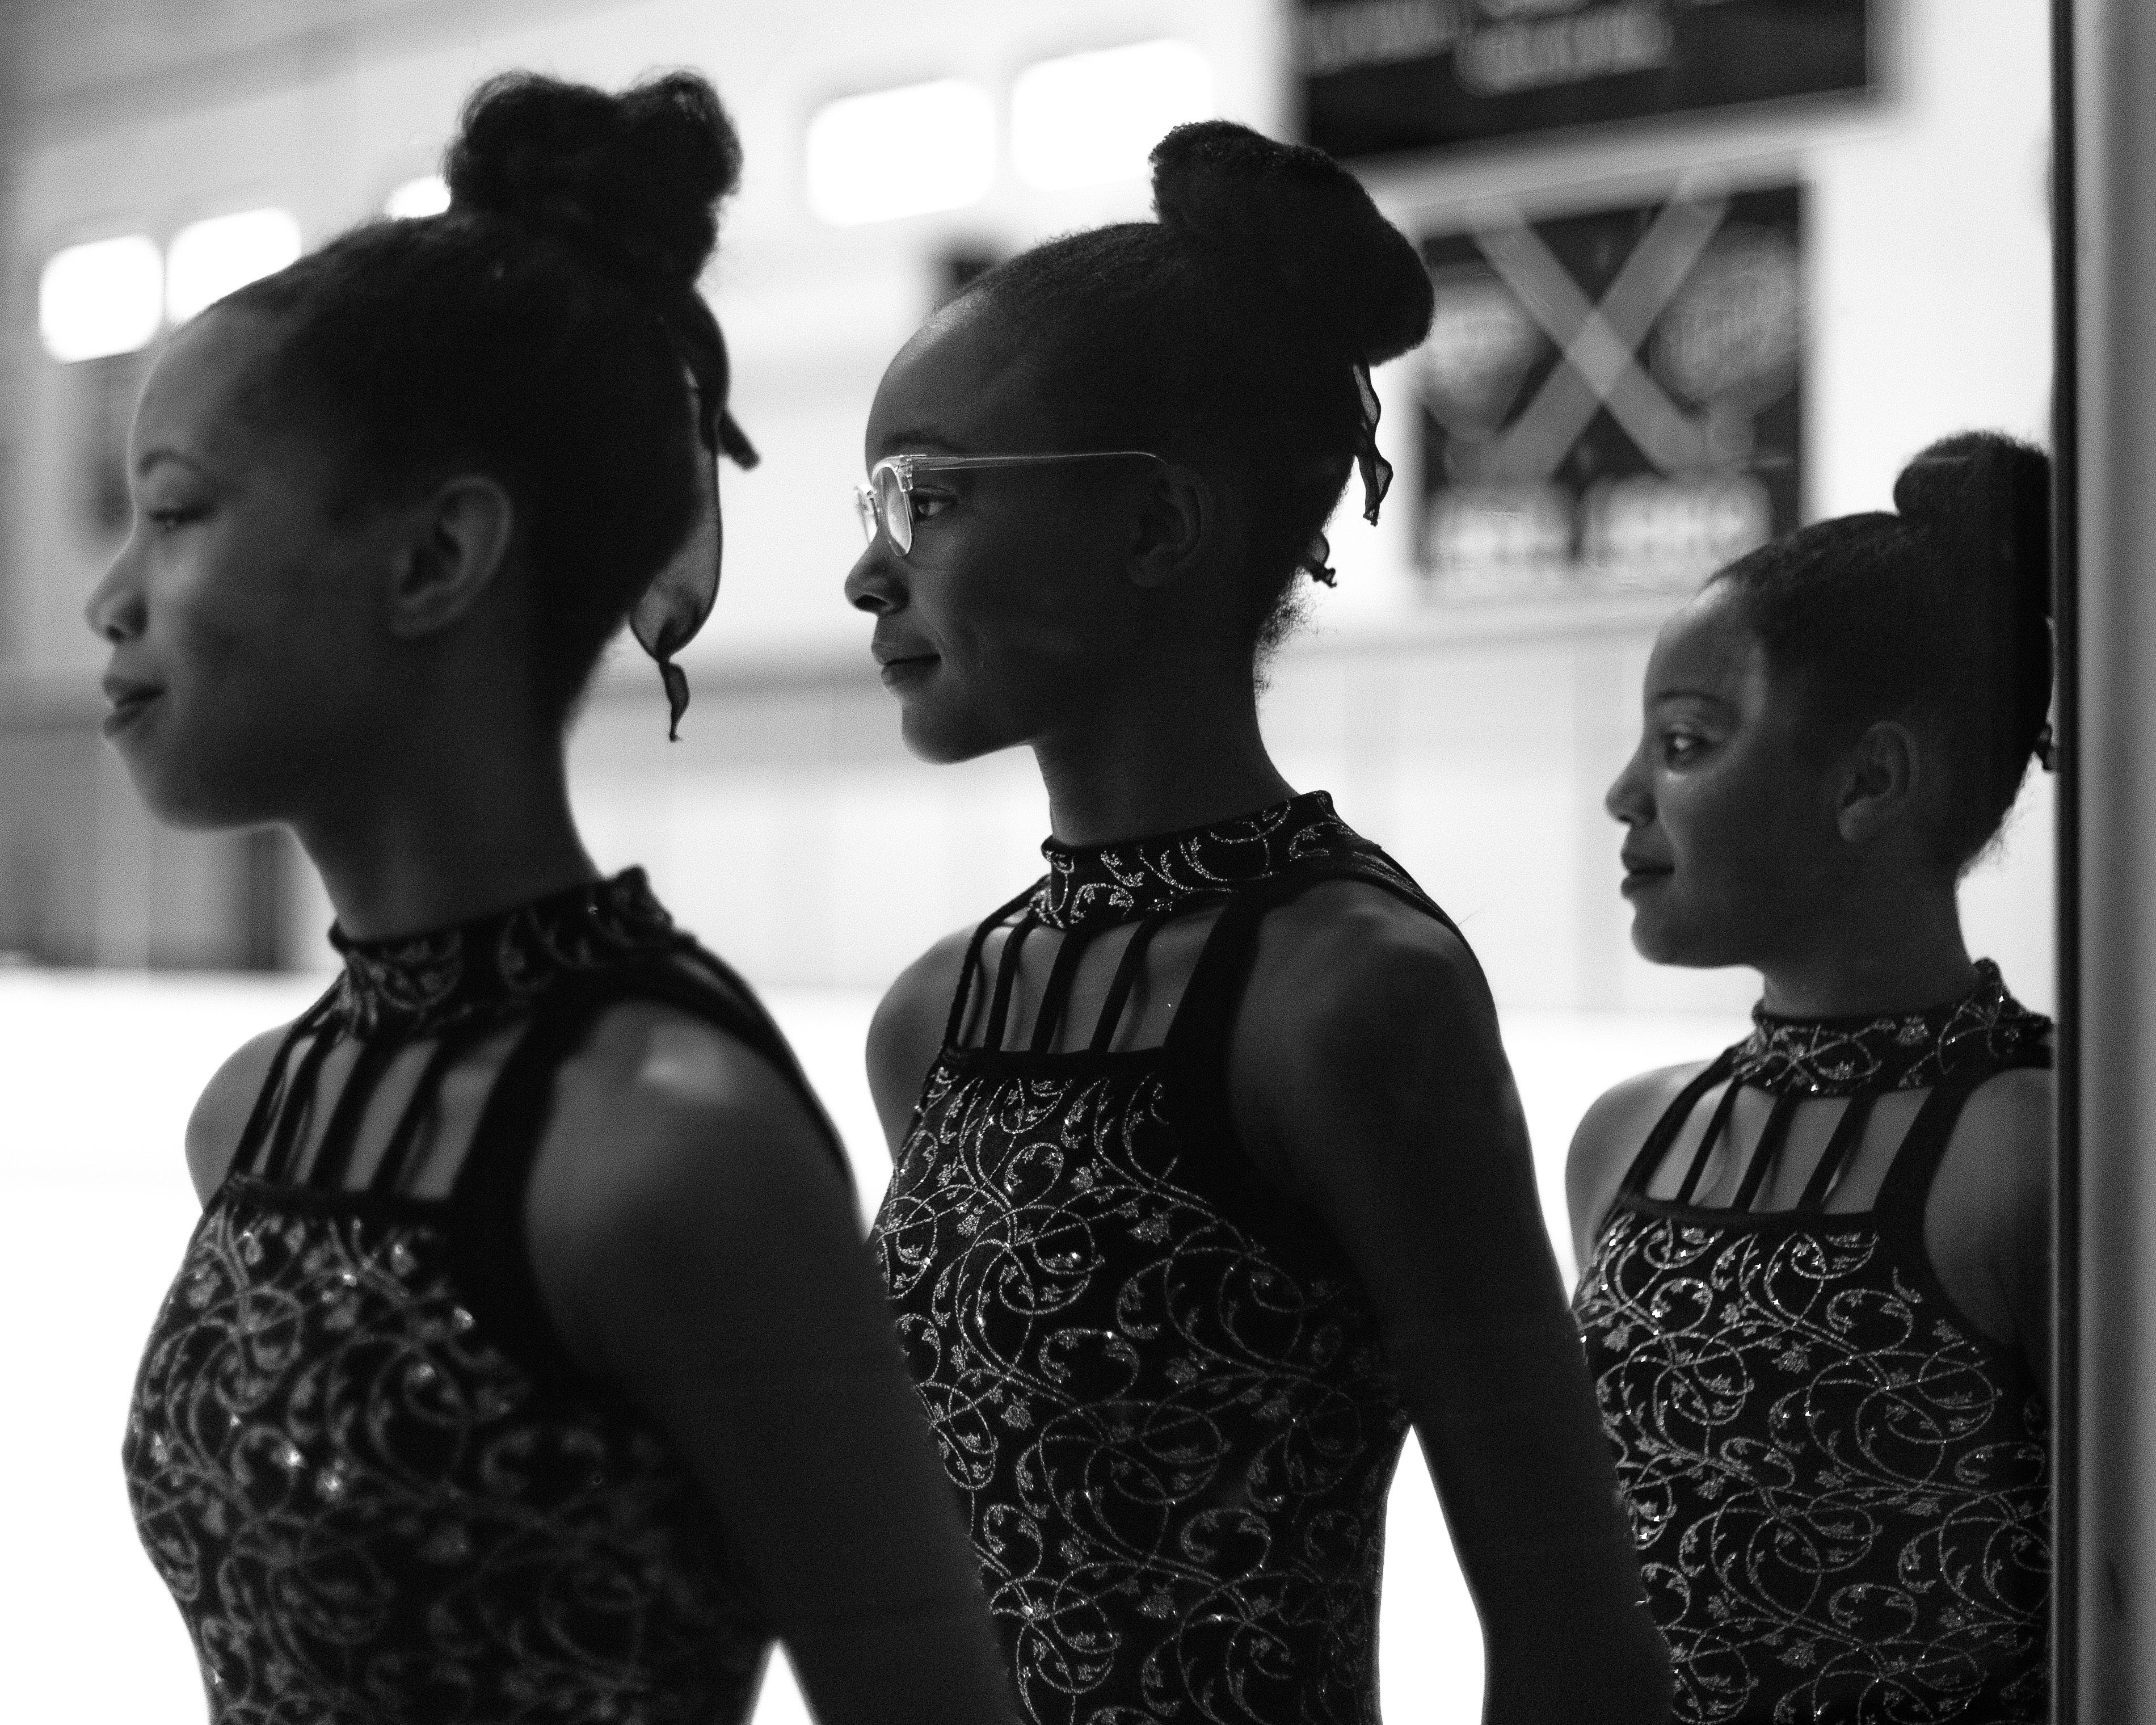 Meet The Artist Capturing The Beauty Of Young Black Ice Skaters